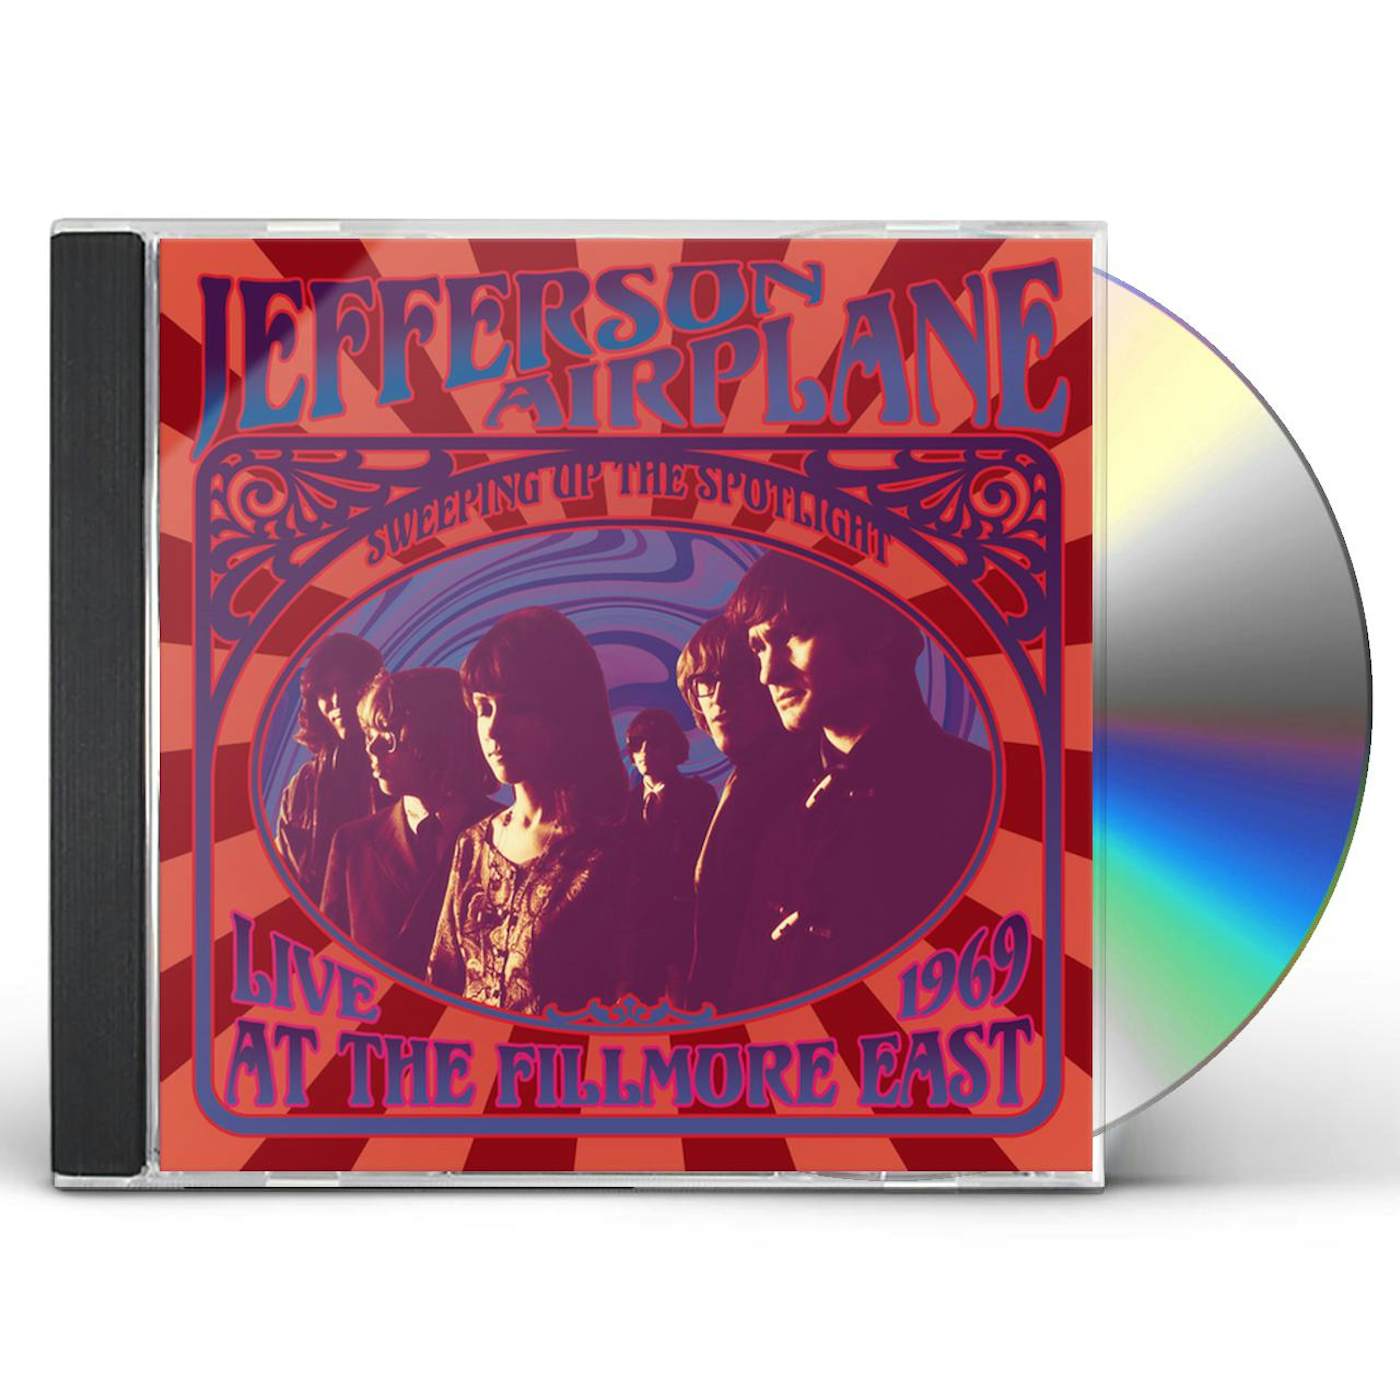 Jefferson Airplane SWEEPING UP THE SPOTLIGHT LIVE AT FILLMORE EAST 69 CD